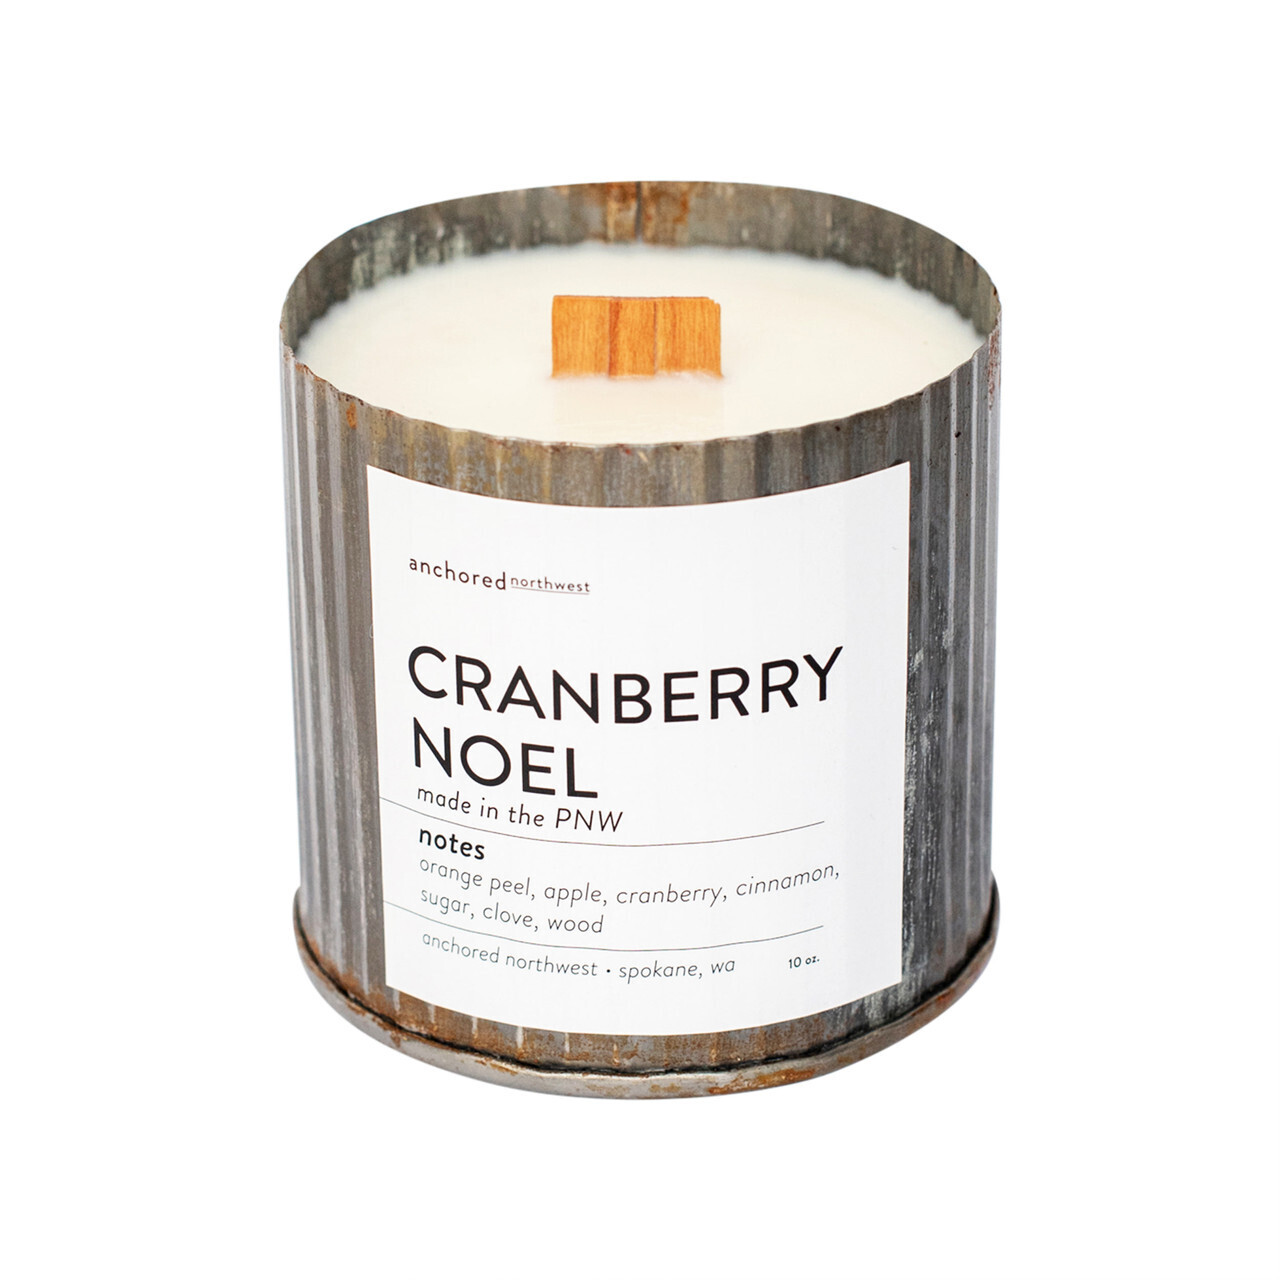 Cranberry Noel Rustic Farmhouse Candle by Anchored Northwest